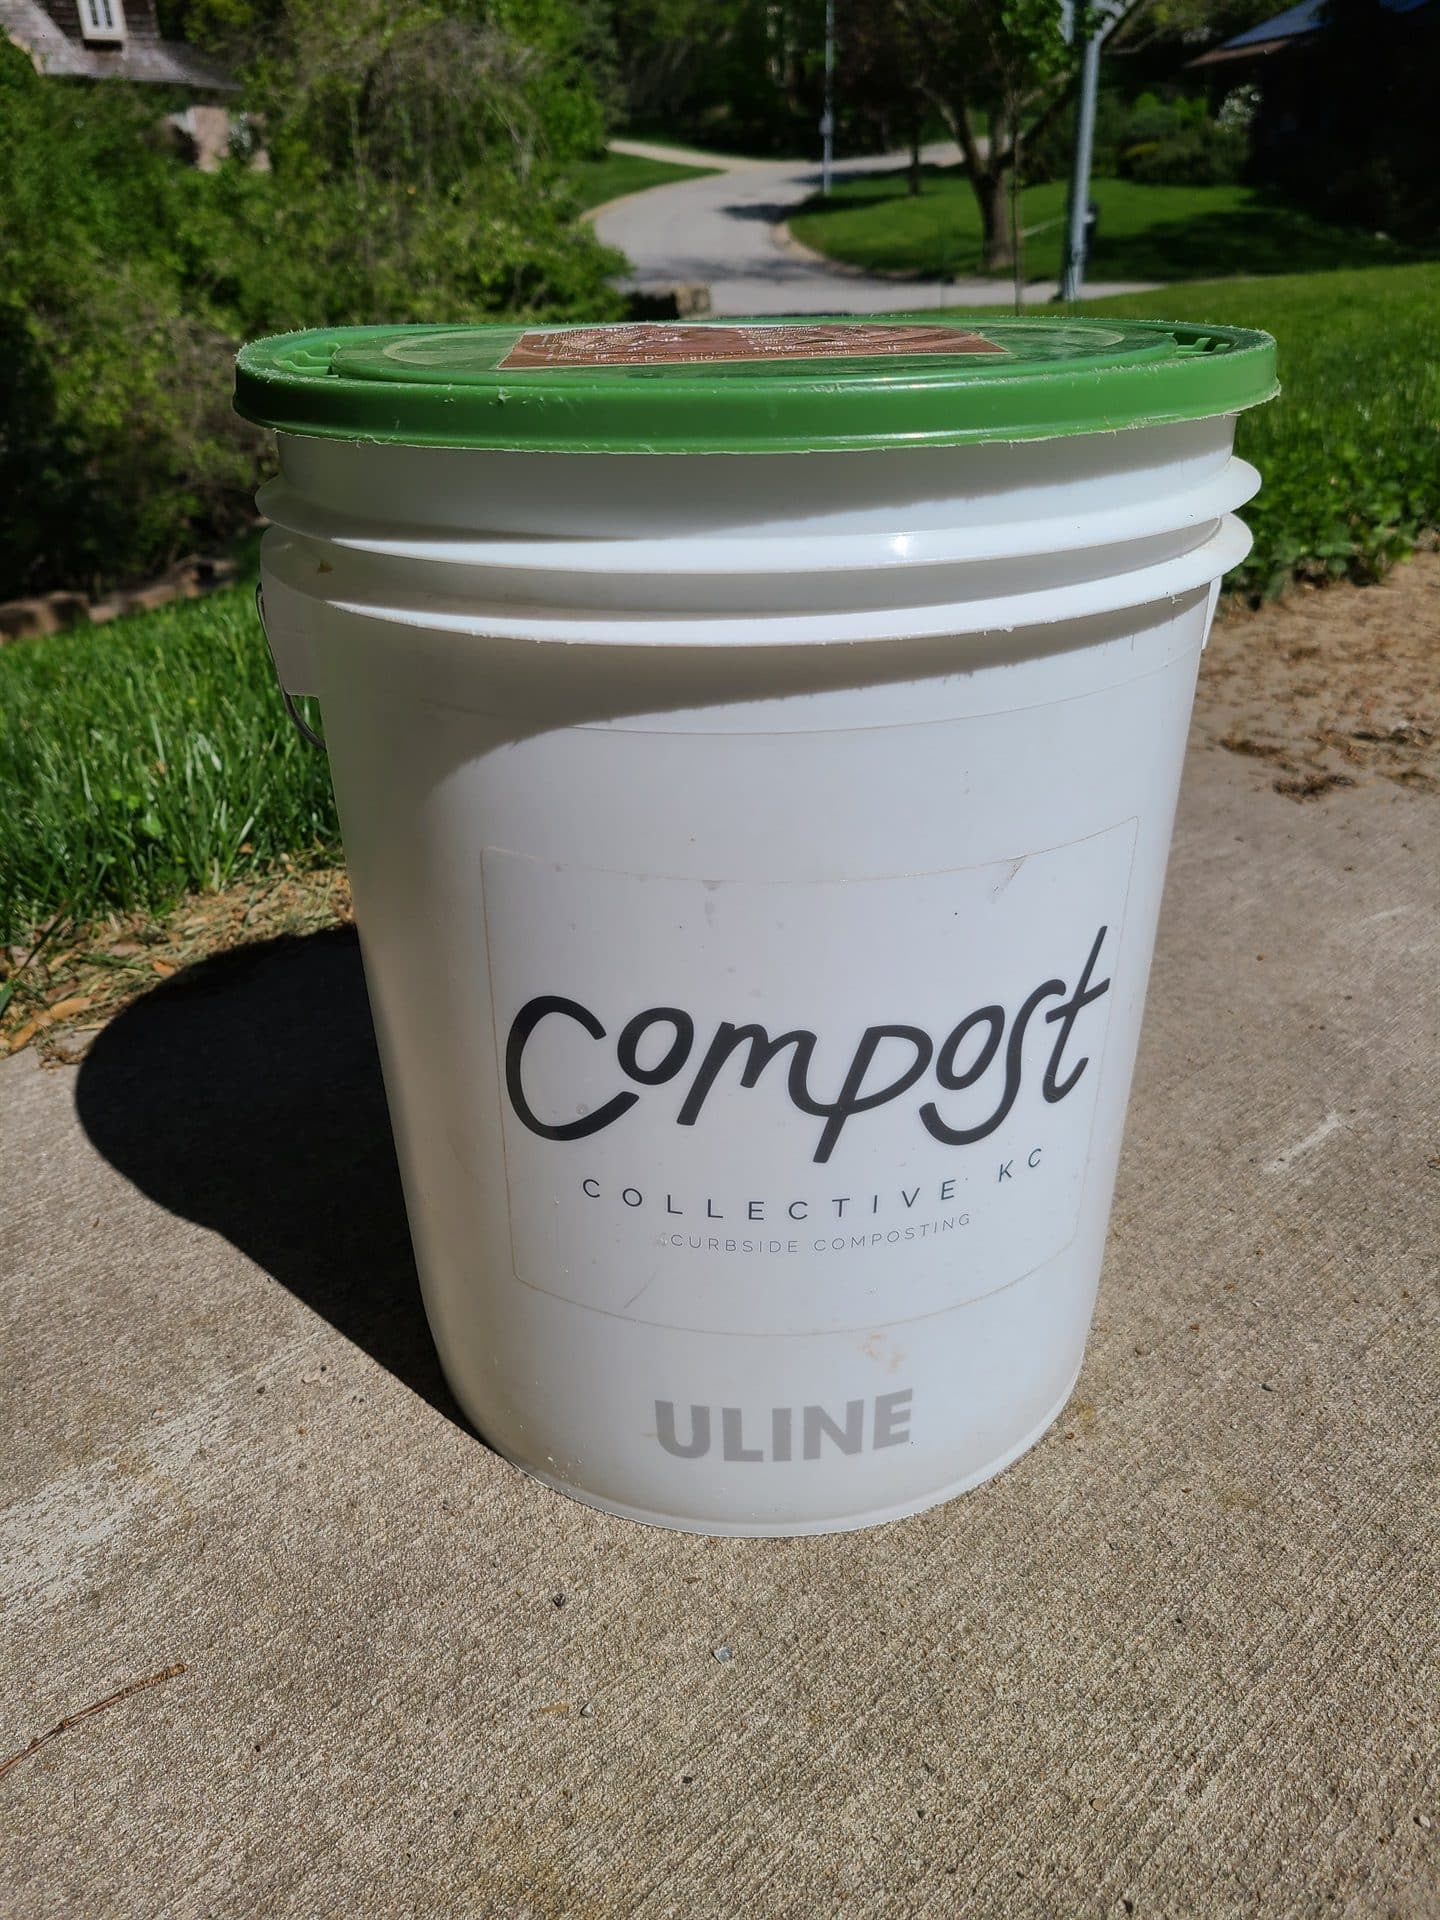 Compost bin for curbside pickup